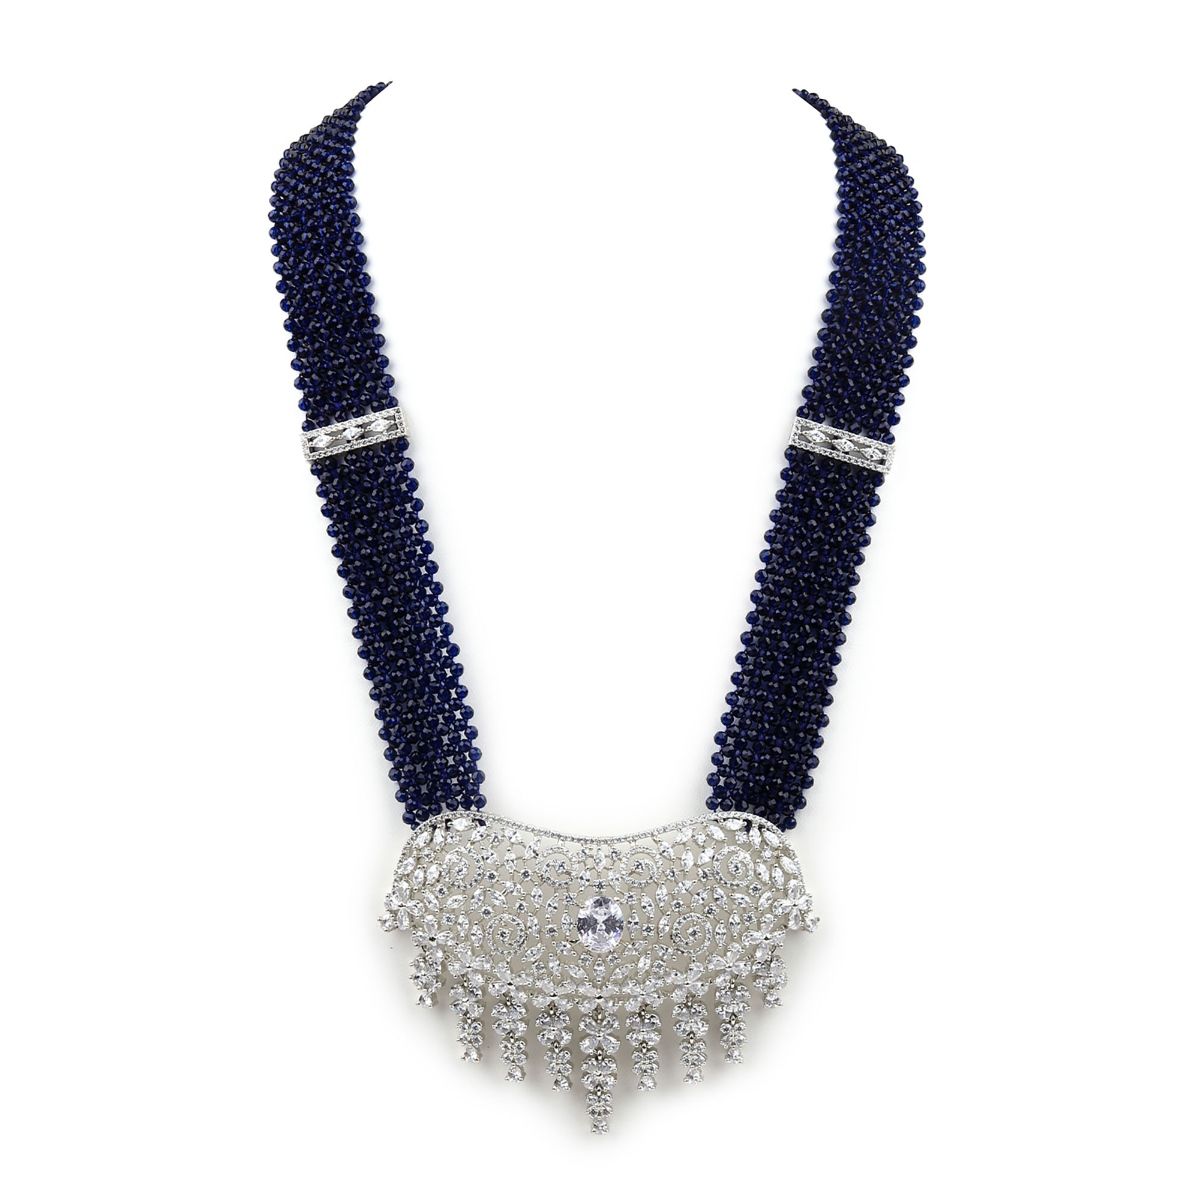 Buy Dark Blue Oval Beads Statement Necklace Multi-Strand Long Chains with  Crystal Charms Pendant at Amazon.in